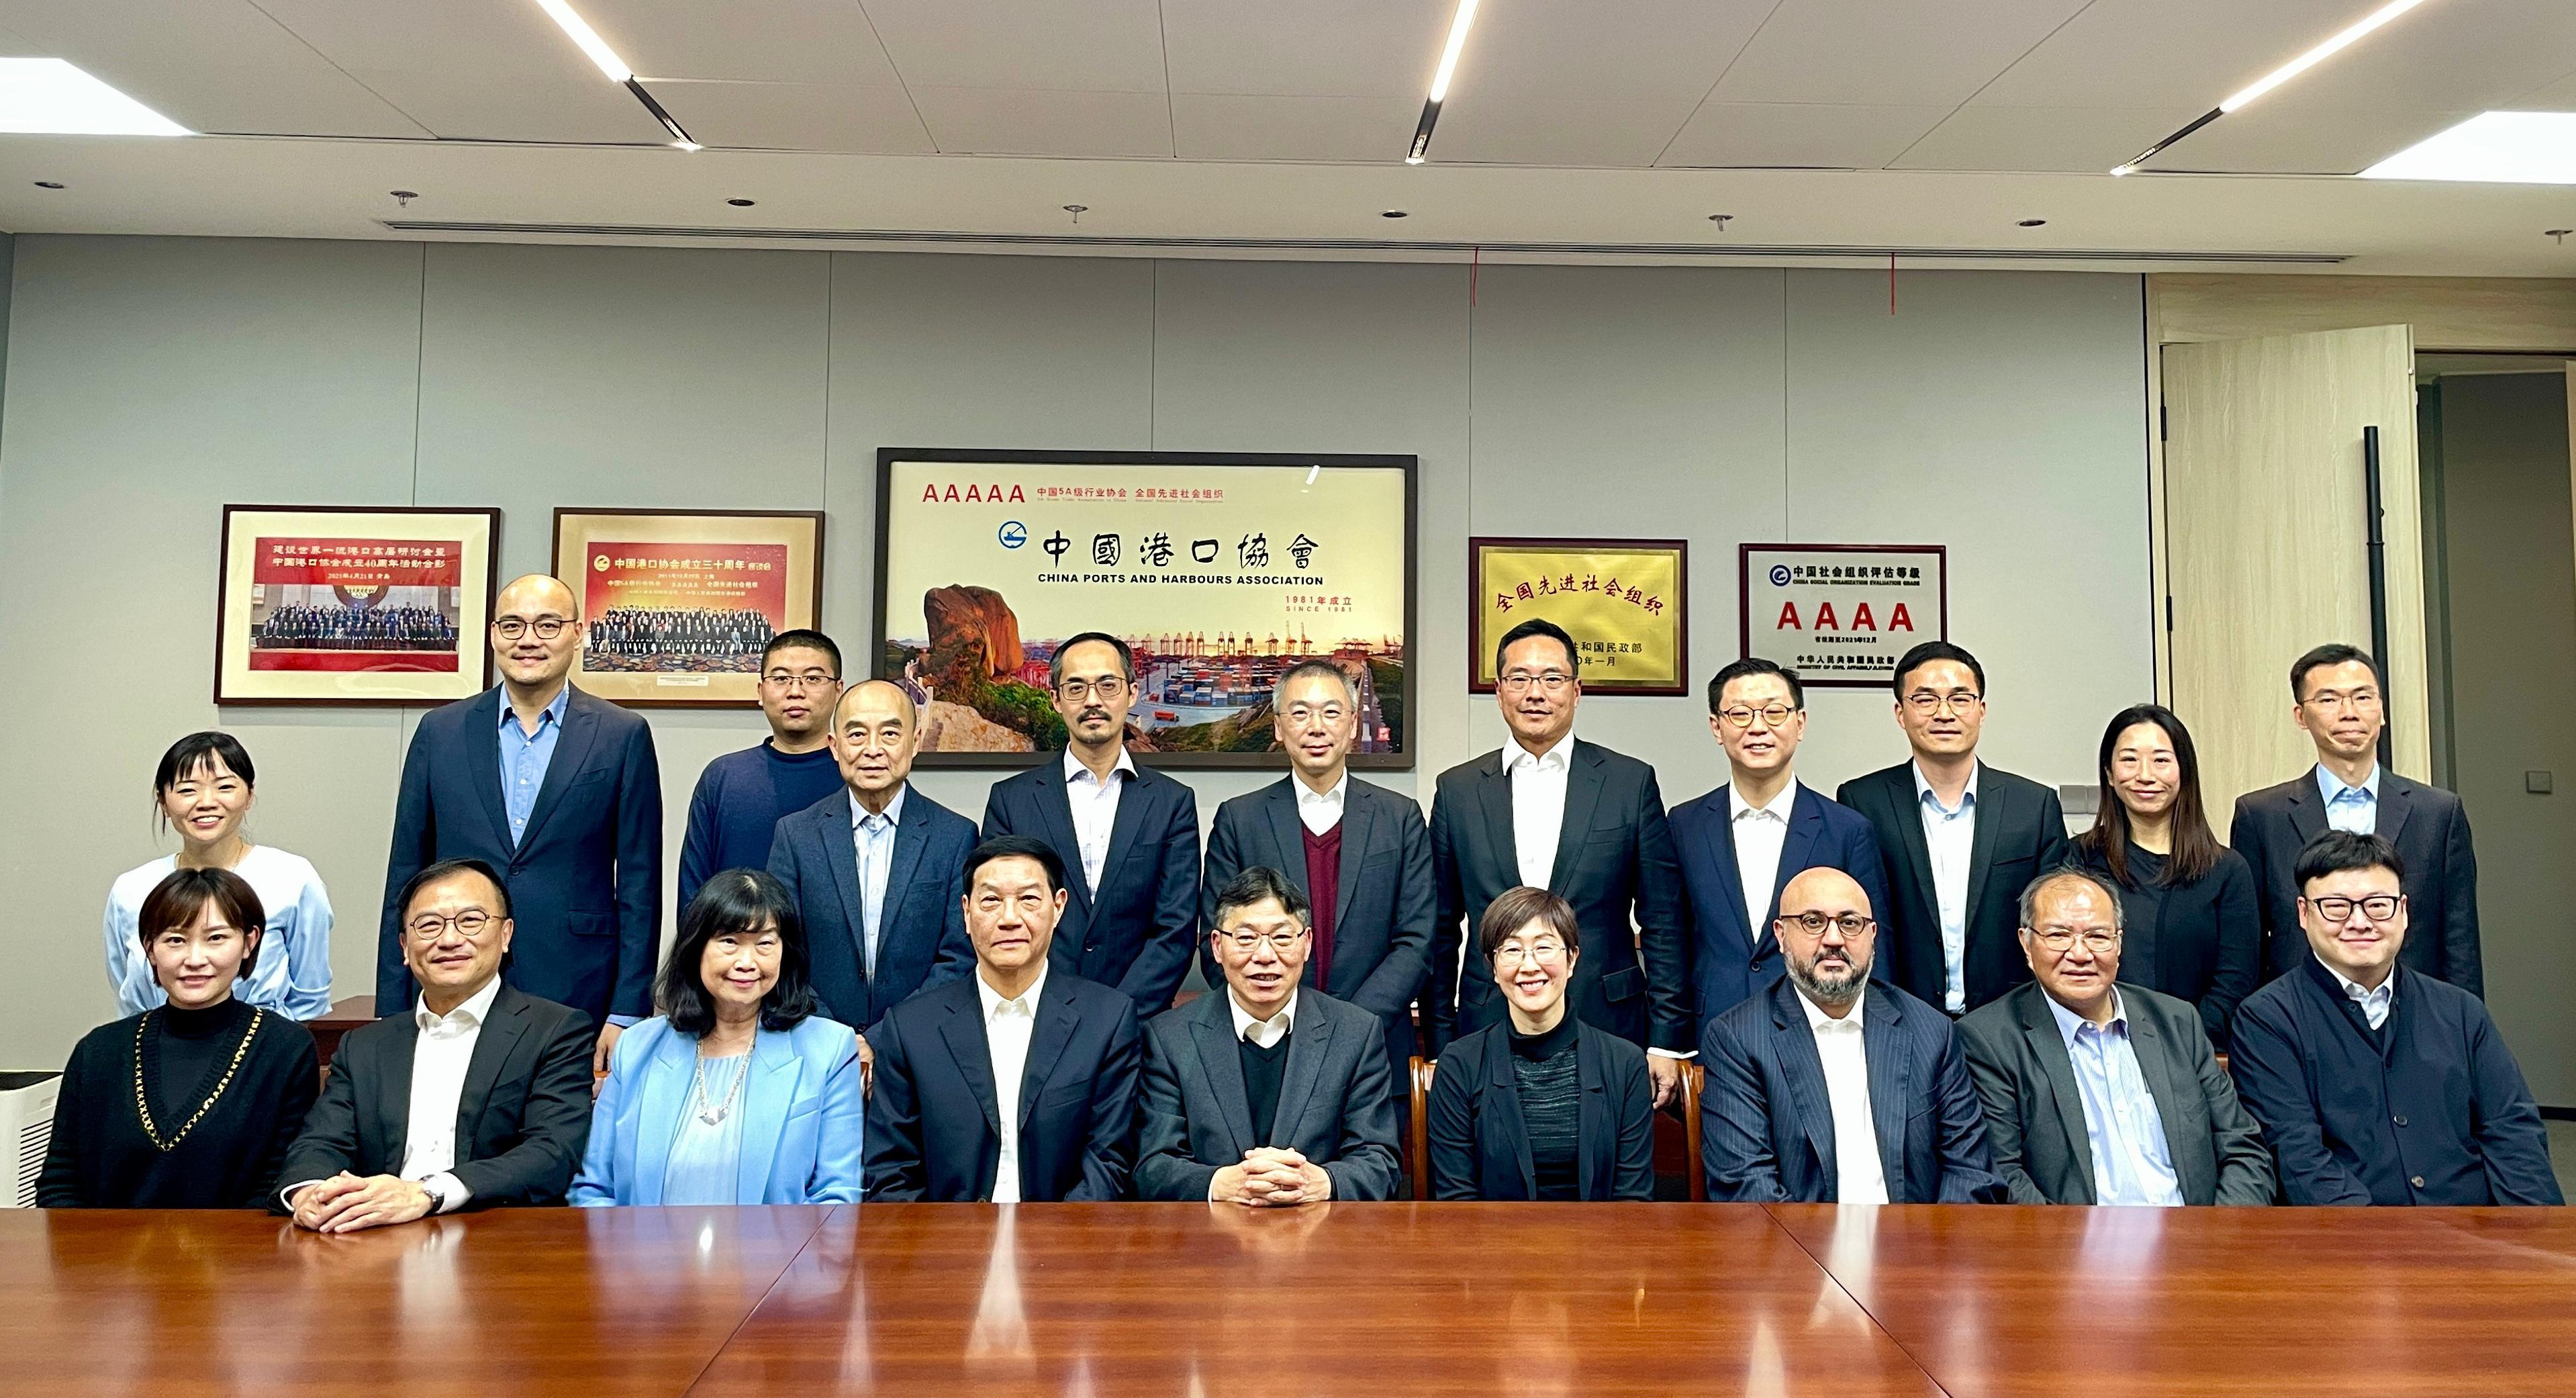 The Chairman of the Hong Kong Maritime and Port Board (HKMPB) and the Secretary for Transport and Logistics, Mr Lam Sai-hung, led a delegation comprising members from the HKMPB, the Marine Department, Invest Hong Kong and the Hong Kong Trade Development Council to visit Shanghai today (December 4), where they met with representatives of the China Ports and Harbours Association (CPHA). Photo shows Mr Lam (front row, centre); the Director of the Hong Kong Economic and Trade Office in Shanghai, Mrs Laura Aron (front row, fourth right); Executive Vice President of the CPHA, Mr Chen Yingming (front row, fourth left), and others at the meeting.